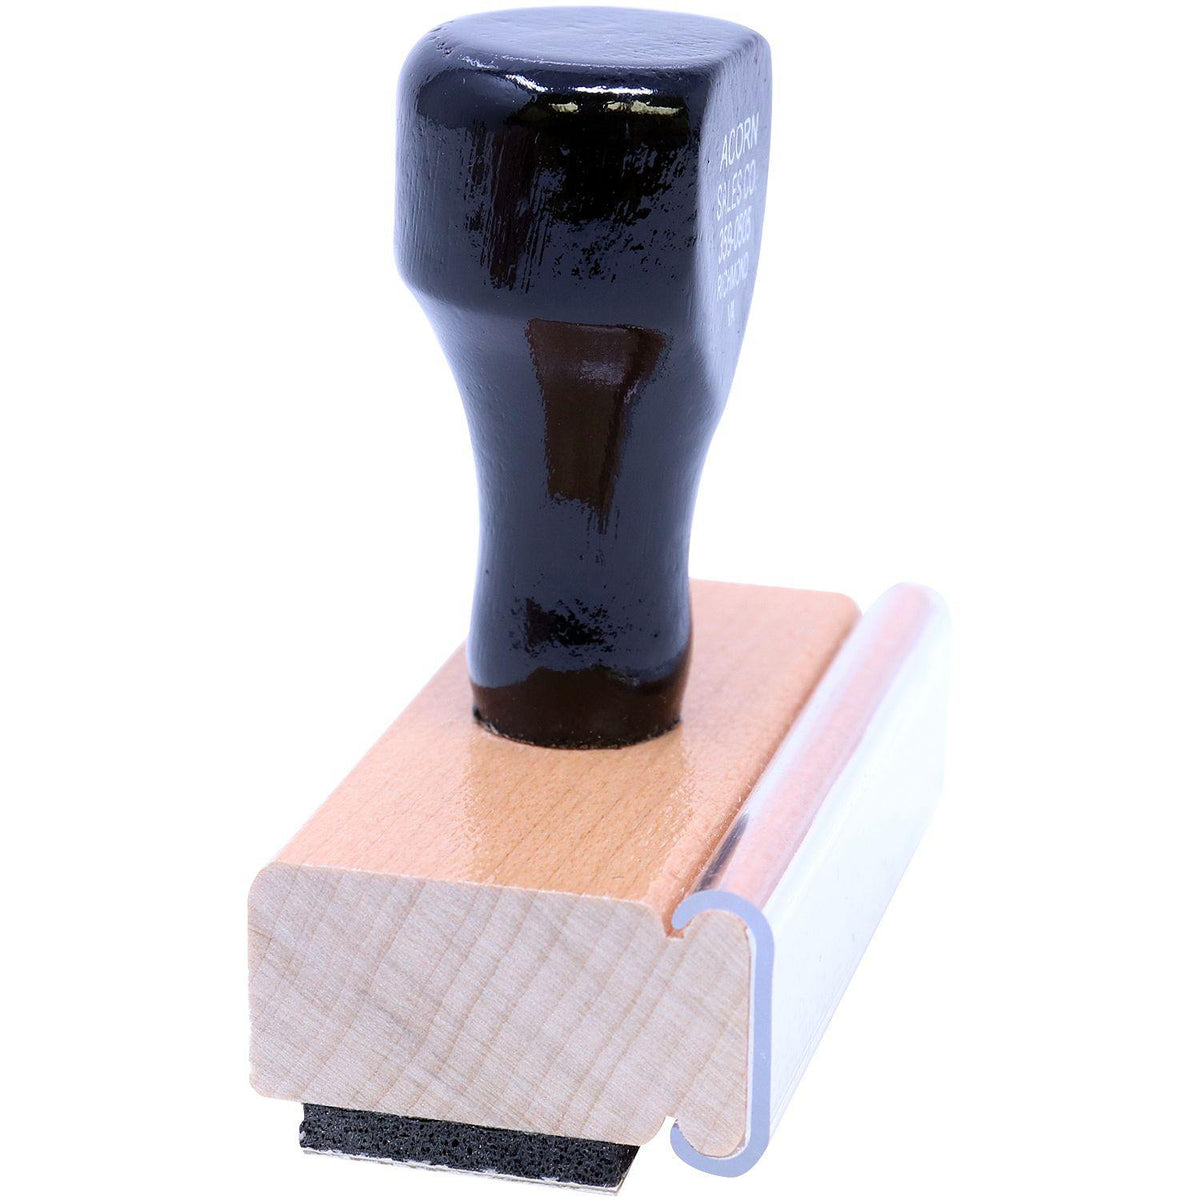 Side View of Large Posted Rubber Stamp at an Angle